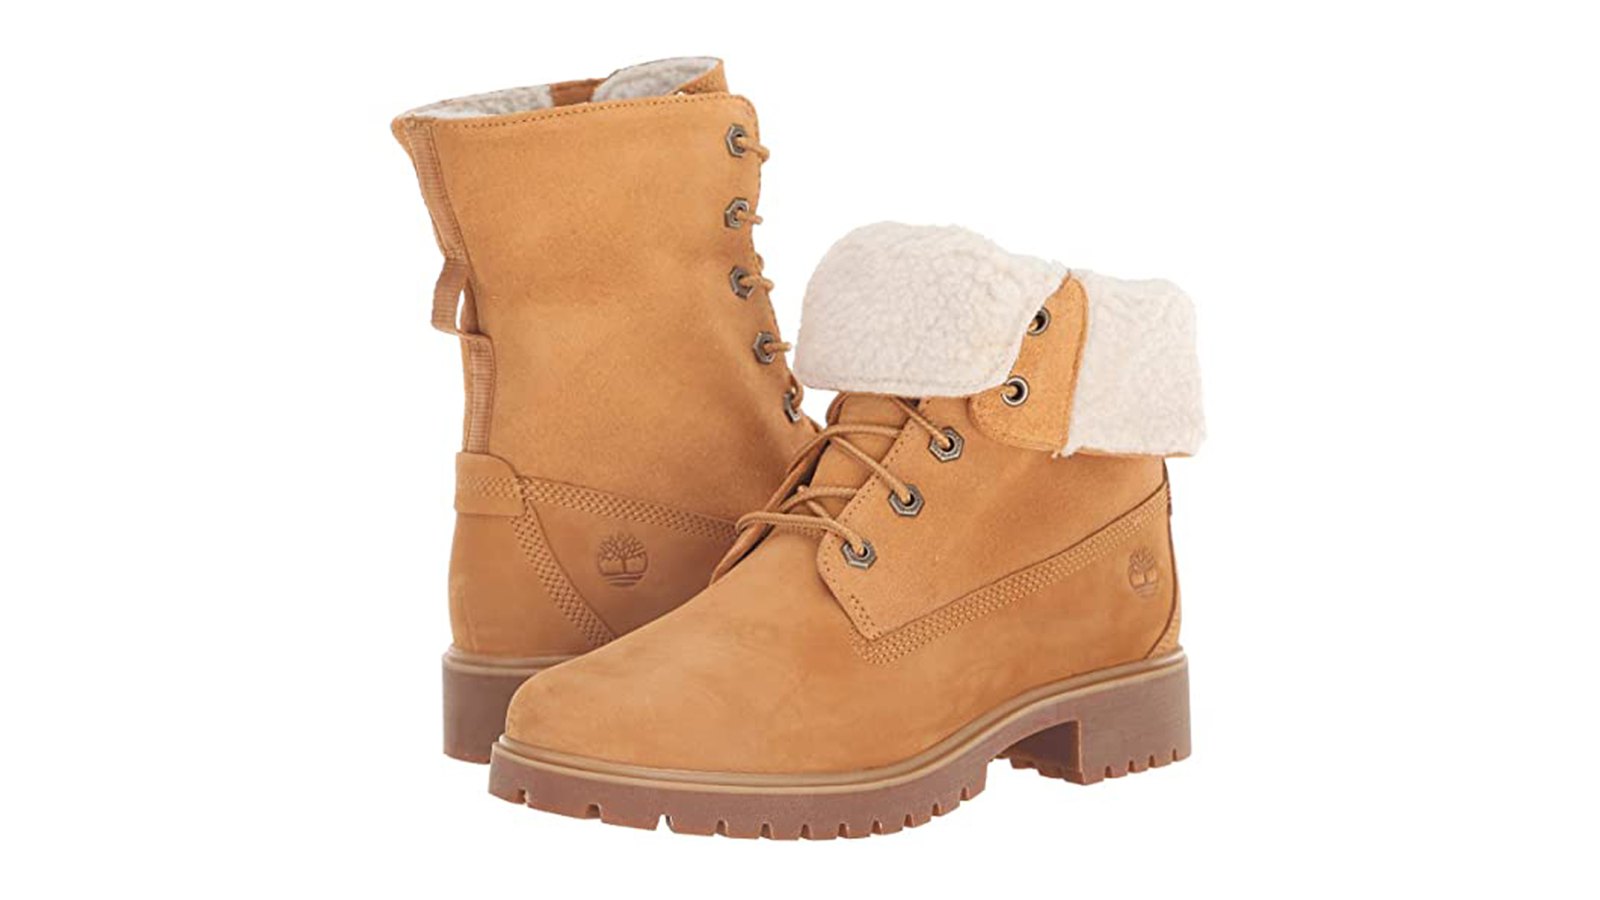 hop slinger verfrommeld Timberland Waterproof Boots Are Perfectly Feminine and on Sale